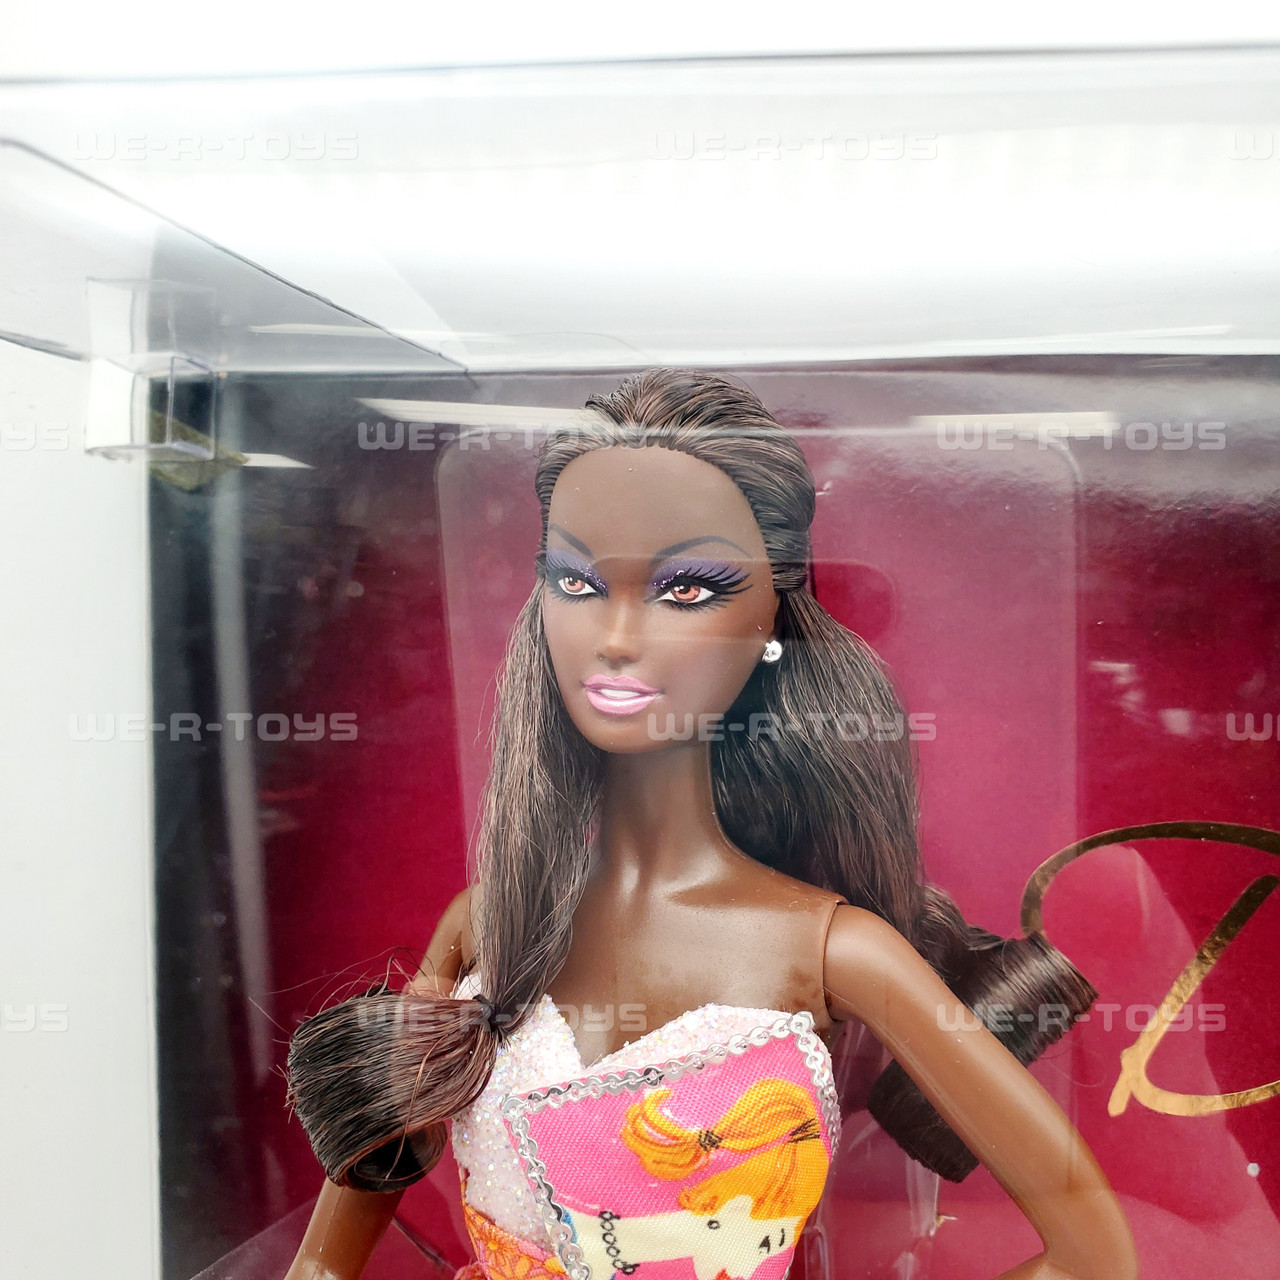 Barbie Collector Generation of Dreams African-American Doll